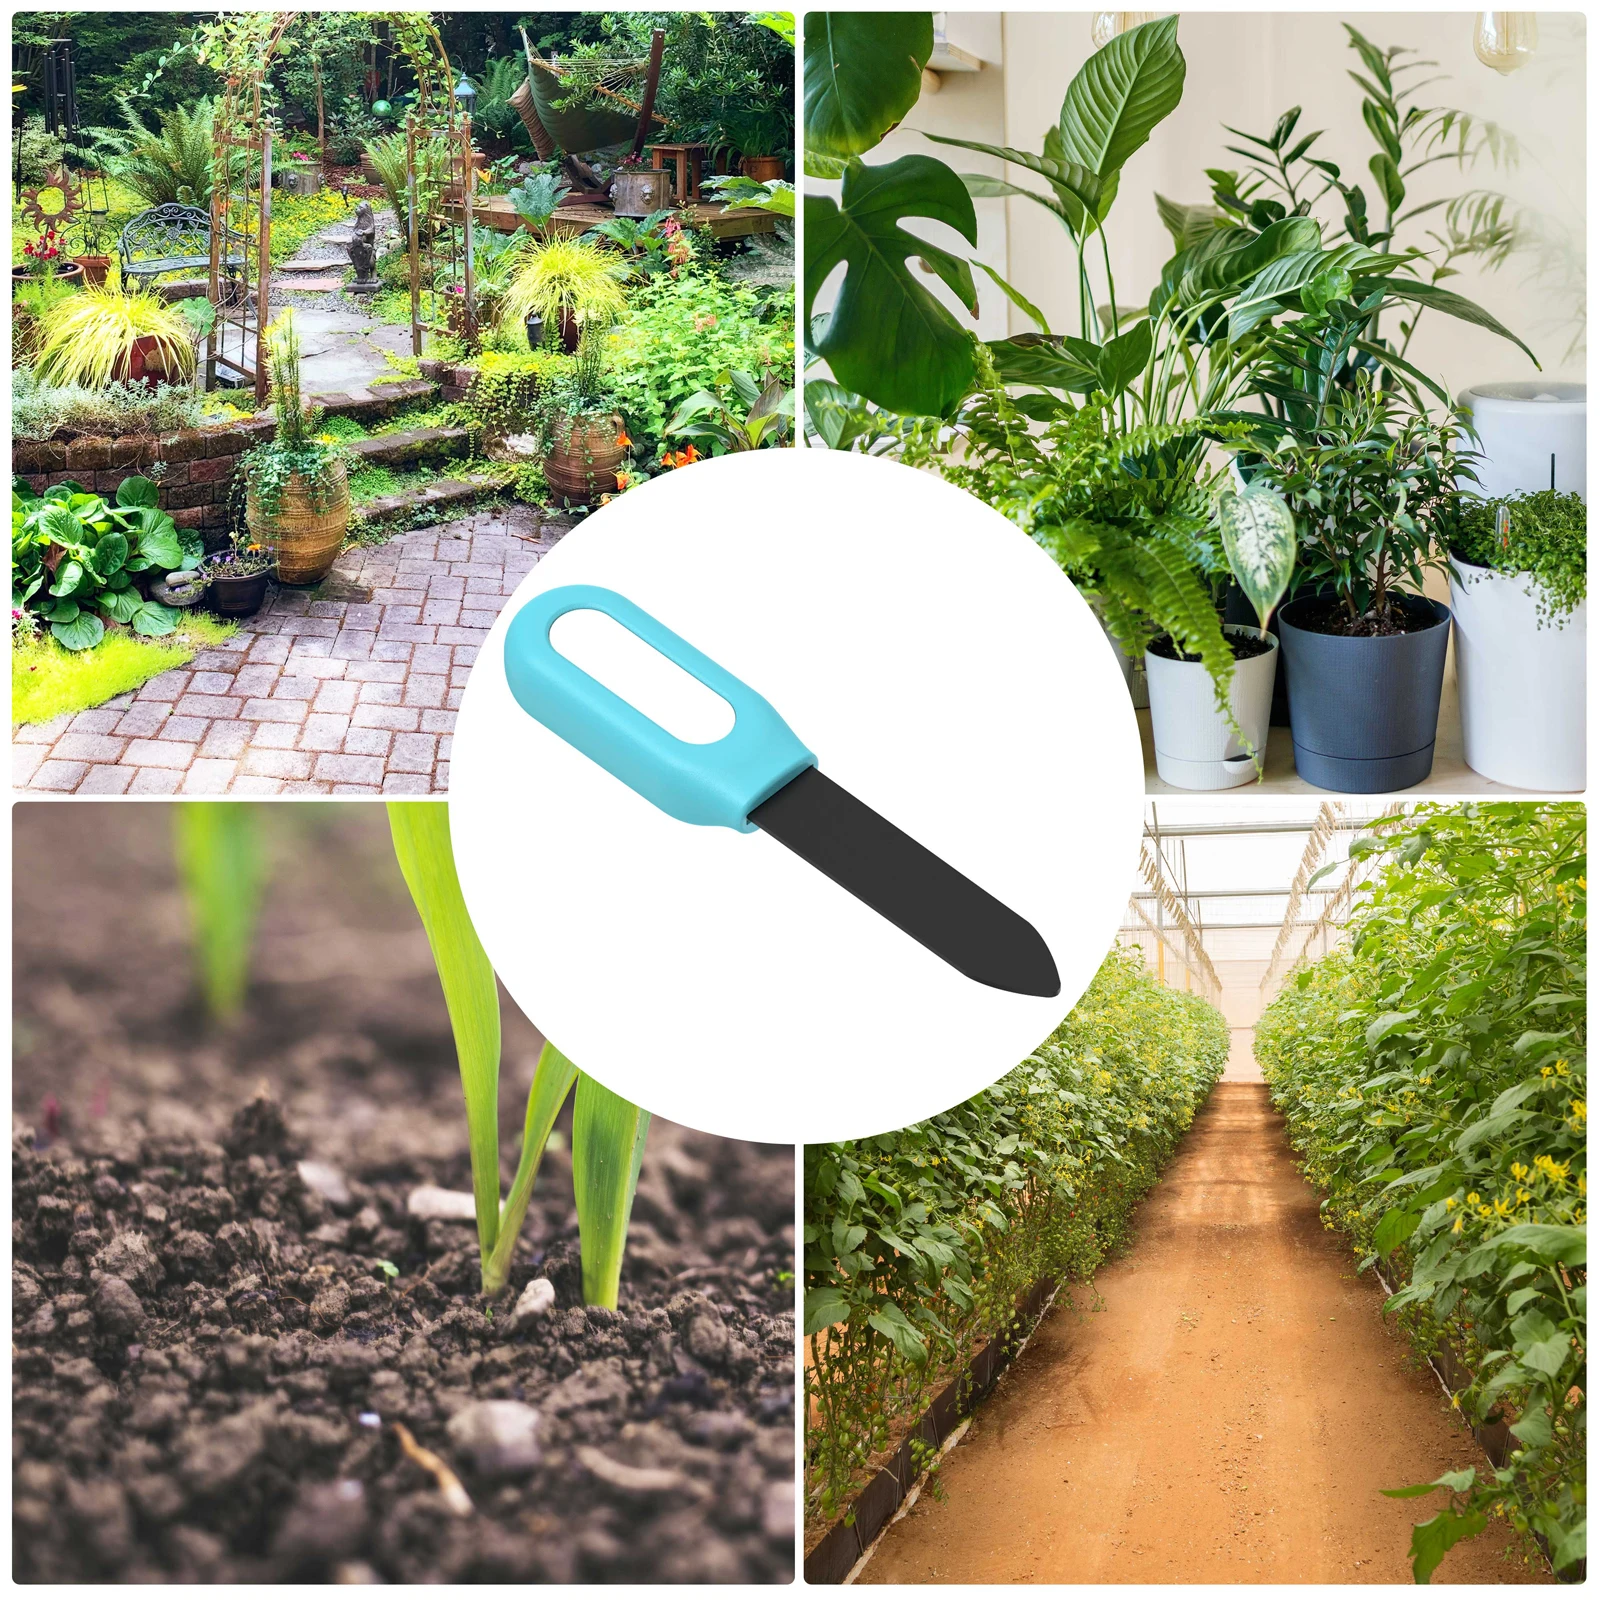 Tuya Soil Moisture Meter Smart Garden Bluetooth Plant Soil Temperature Humidity Monitor Potted Plant Measuring Tool